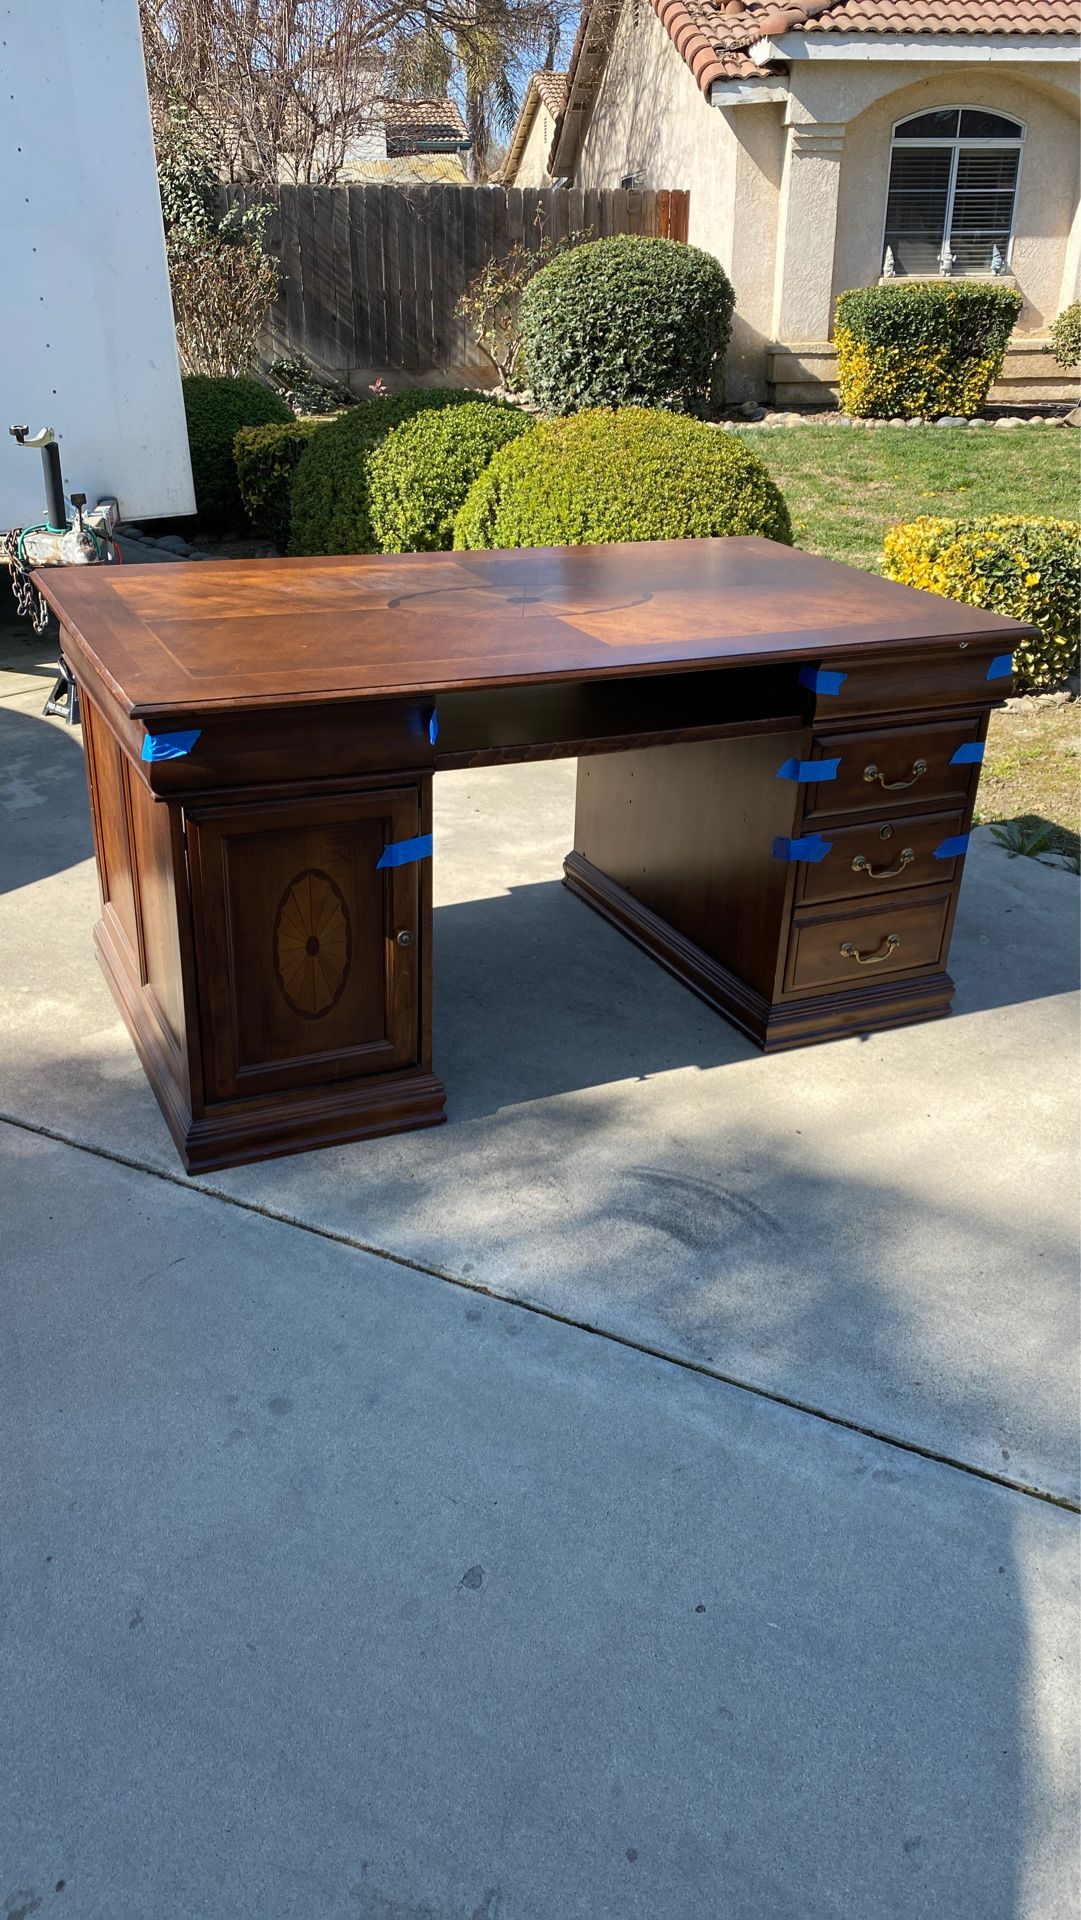 FREE ASHLEY DESK if it’s listed it’s available